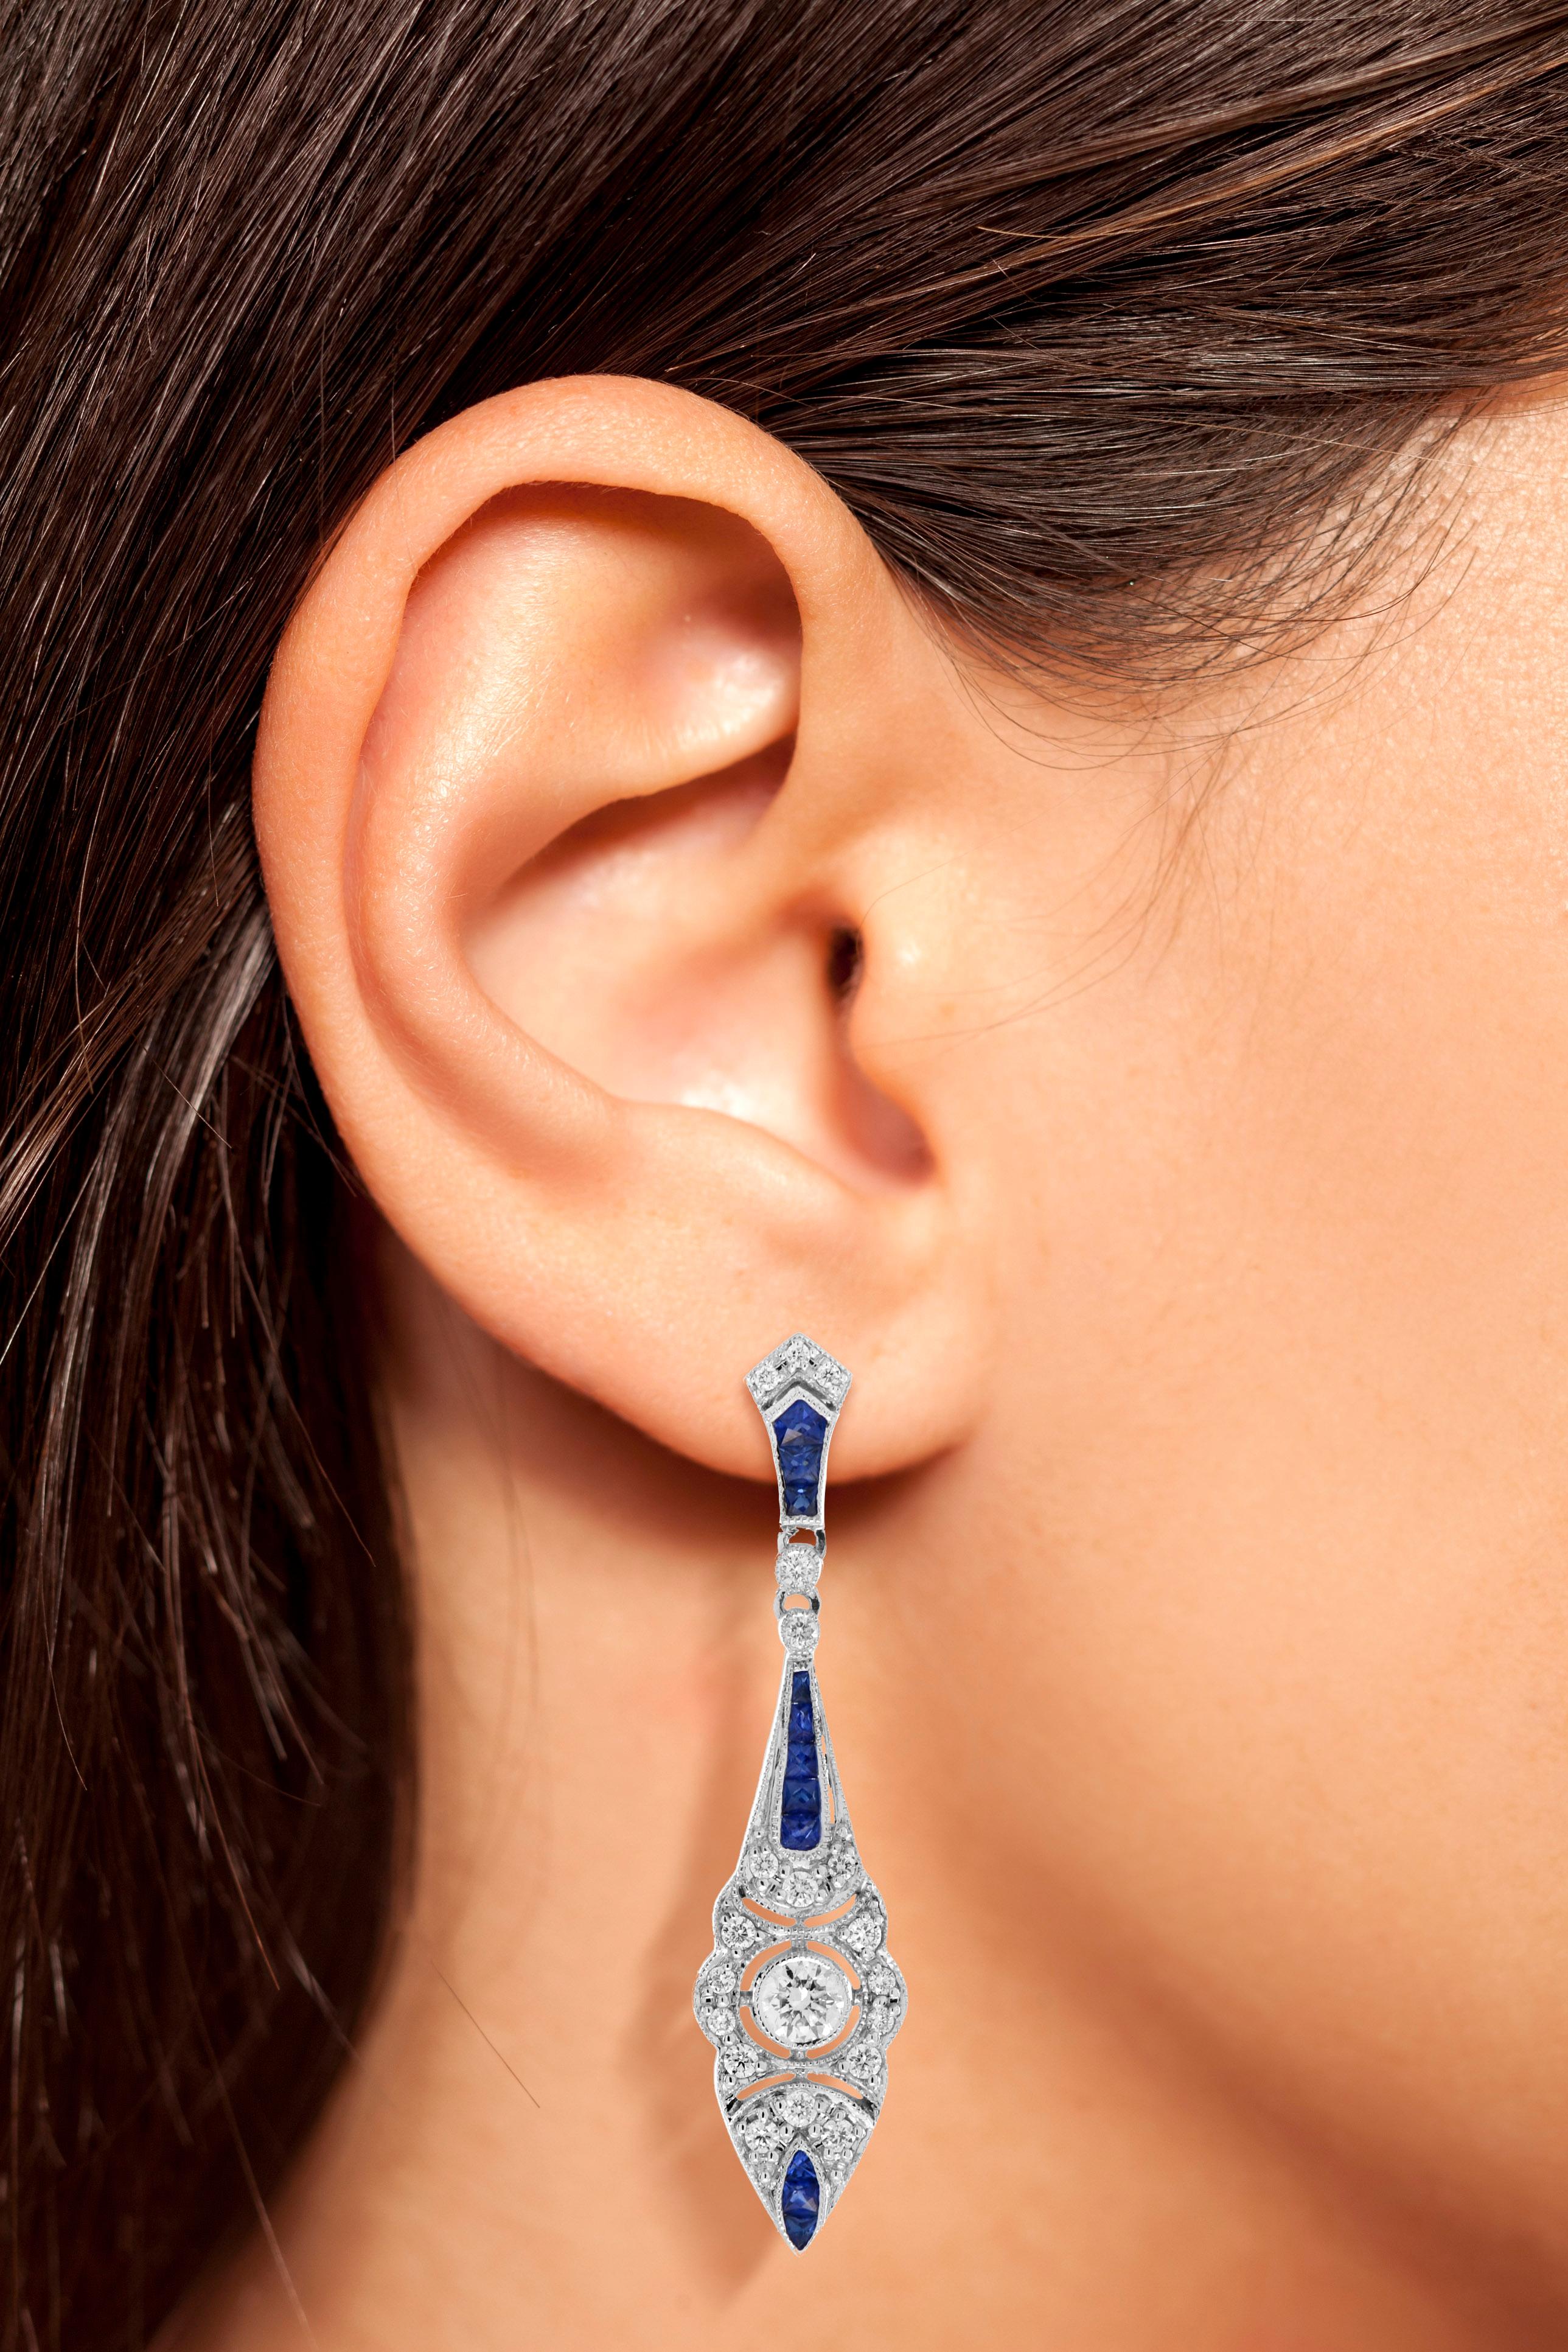 These eye-catching Art Deco-style earrings are hand-crafted in 18k white gold with an intricately detailed geometric design. At the center of each earring, a round diamond is set together with a shimmering diamond accent. These settings are